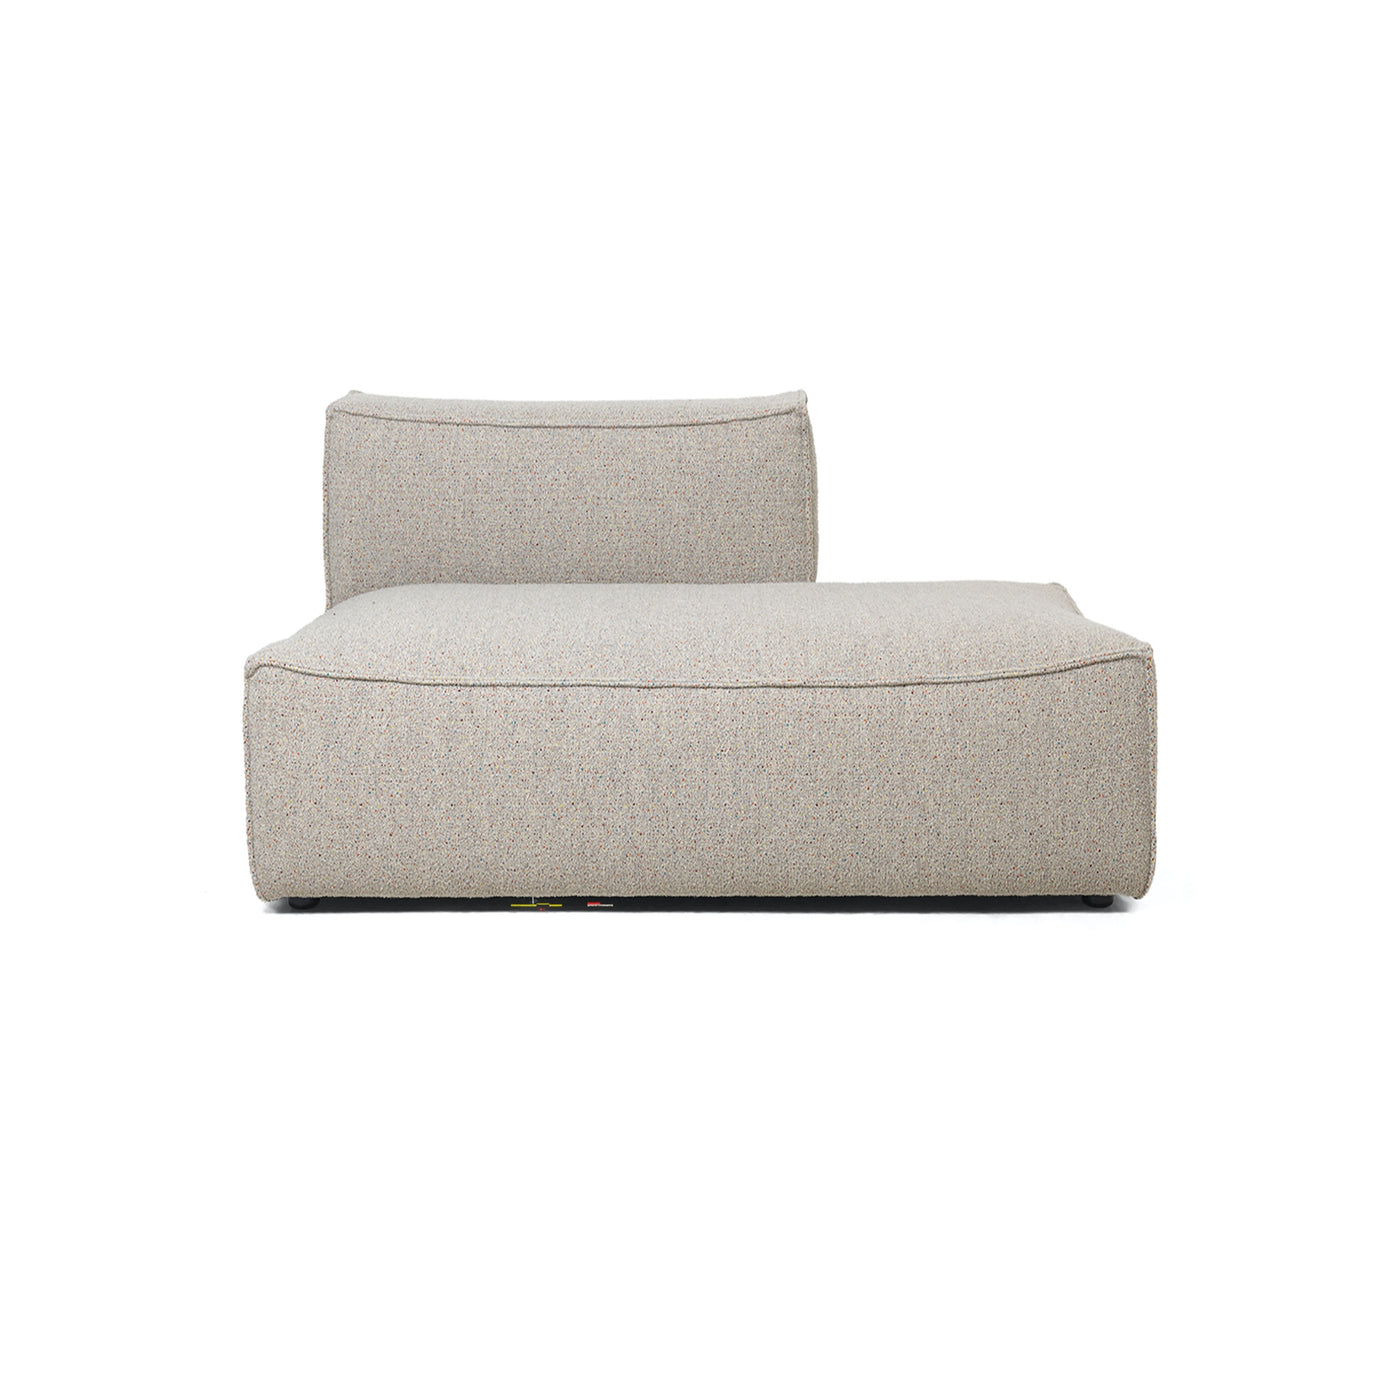 ferm LIVING Catena Modular sofas S301. Made-to-order at someday designs. #colour_light-grey-confetti-boucle